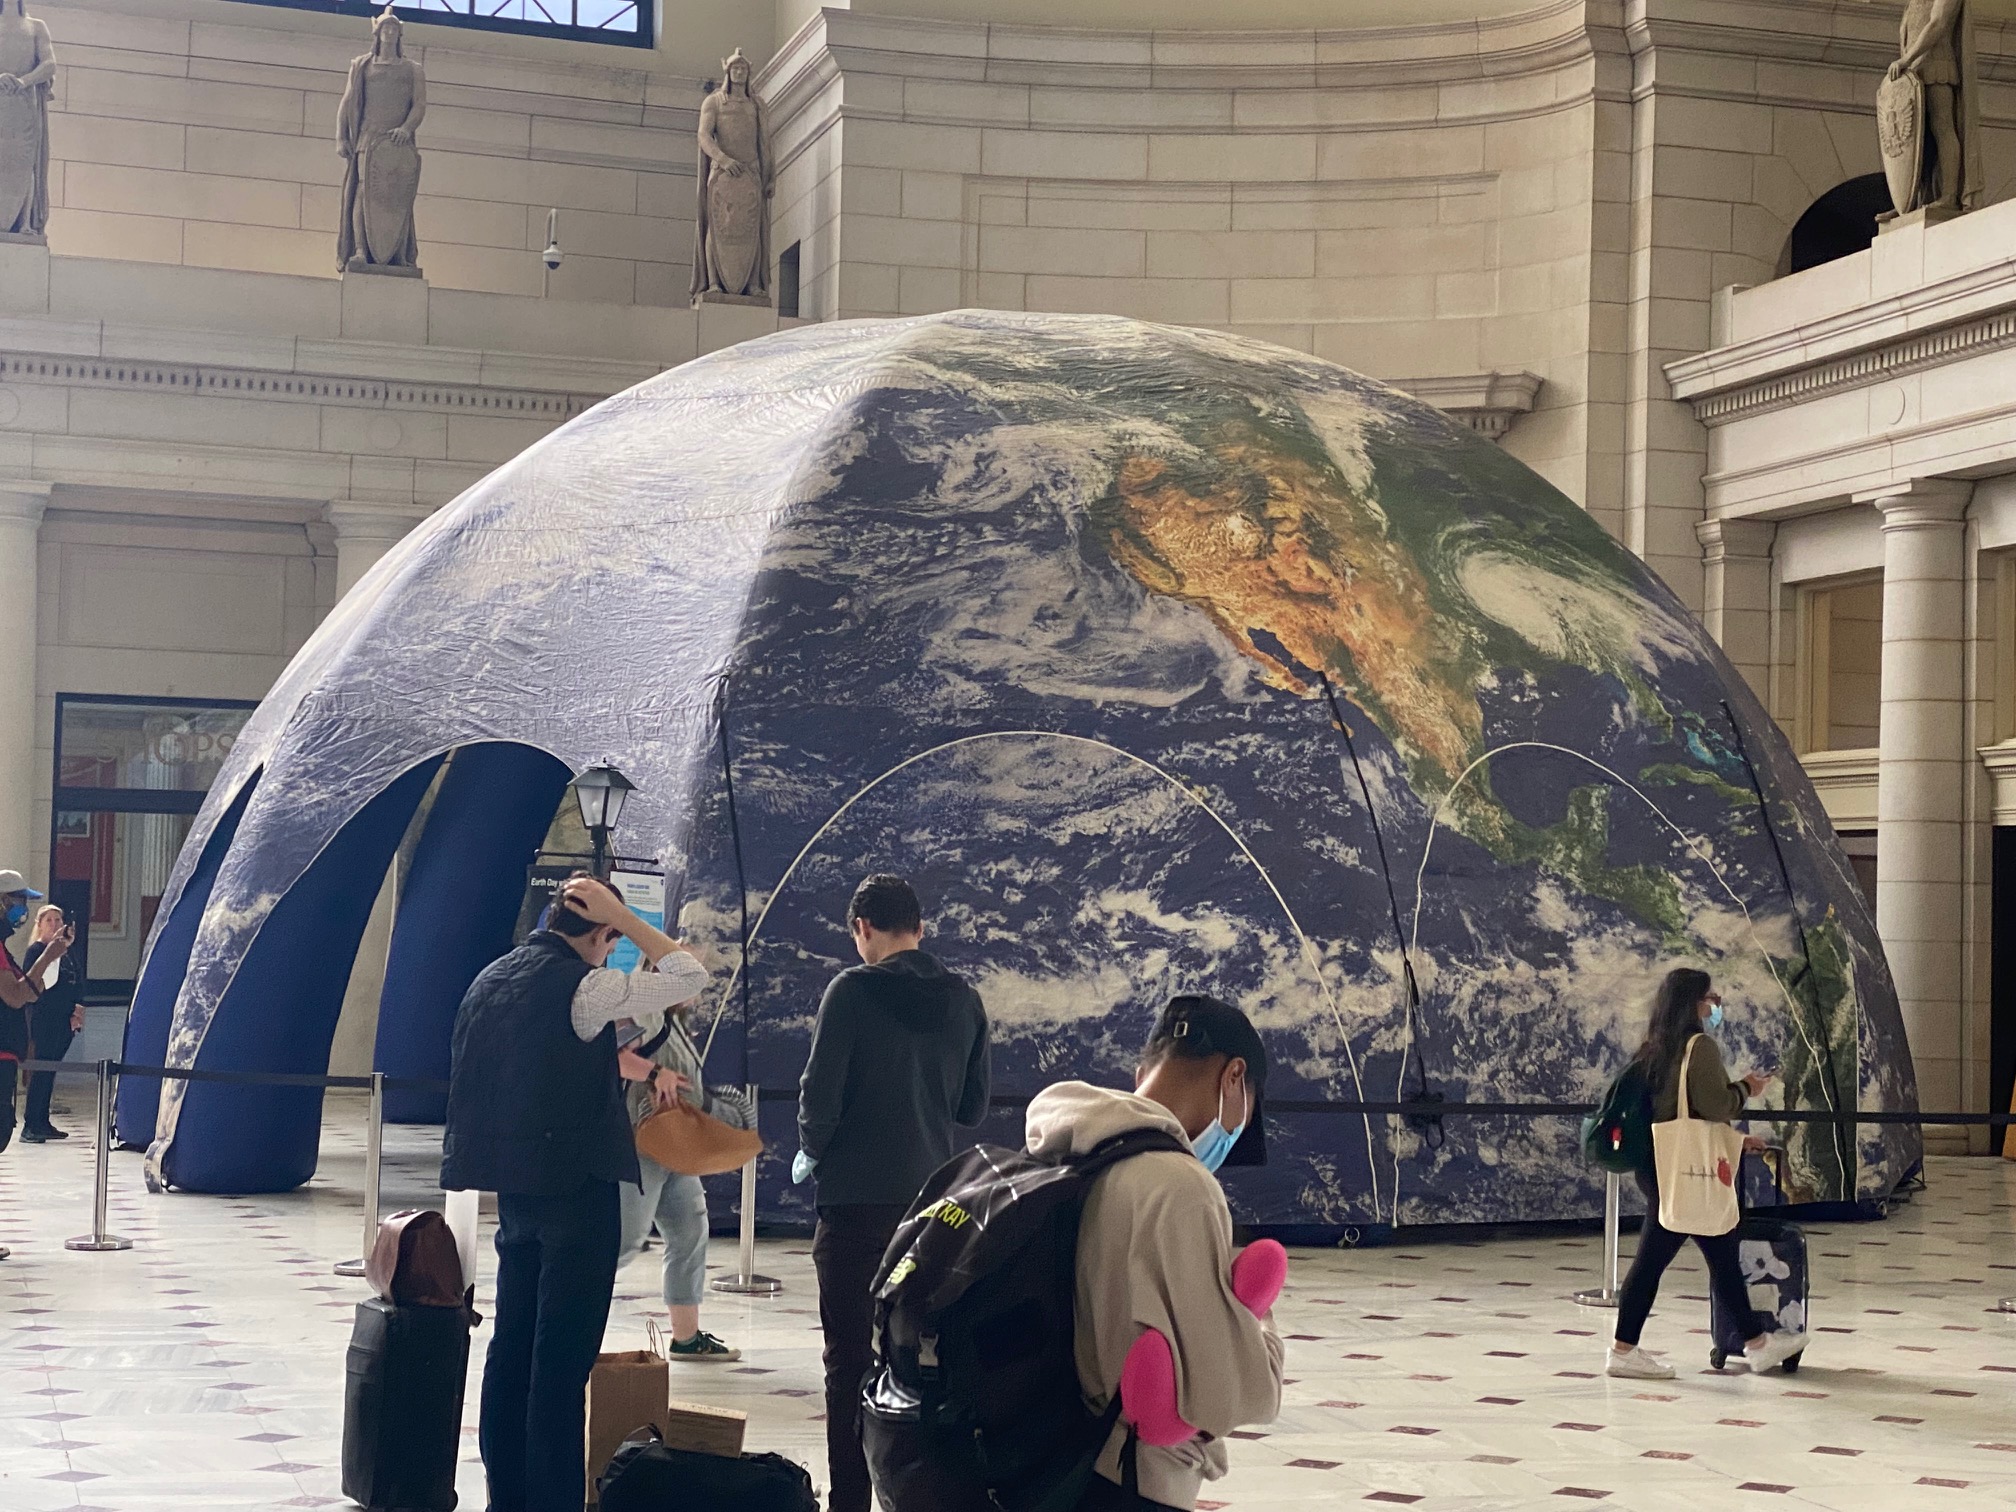 Attendees took in a look at a giant Earth.